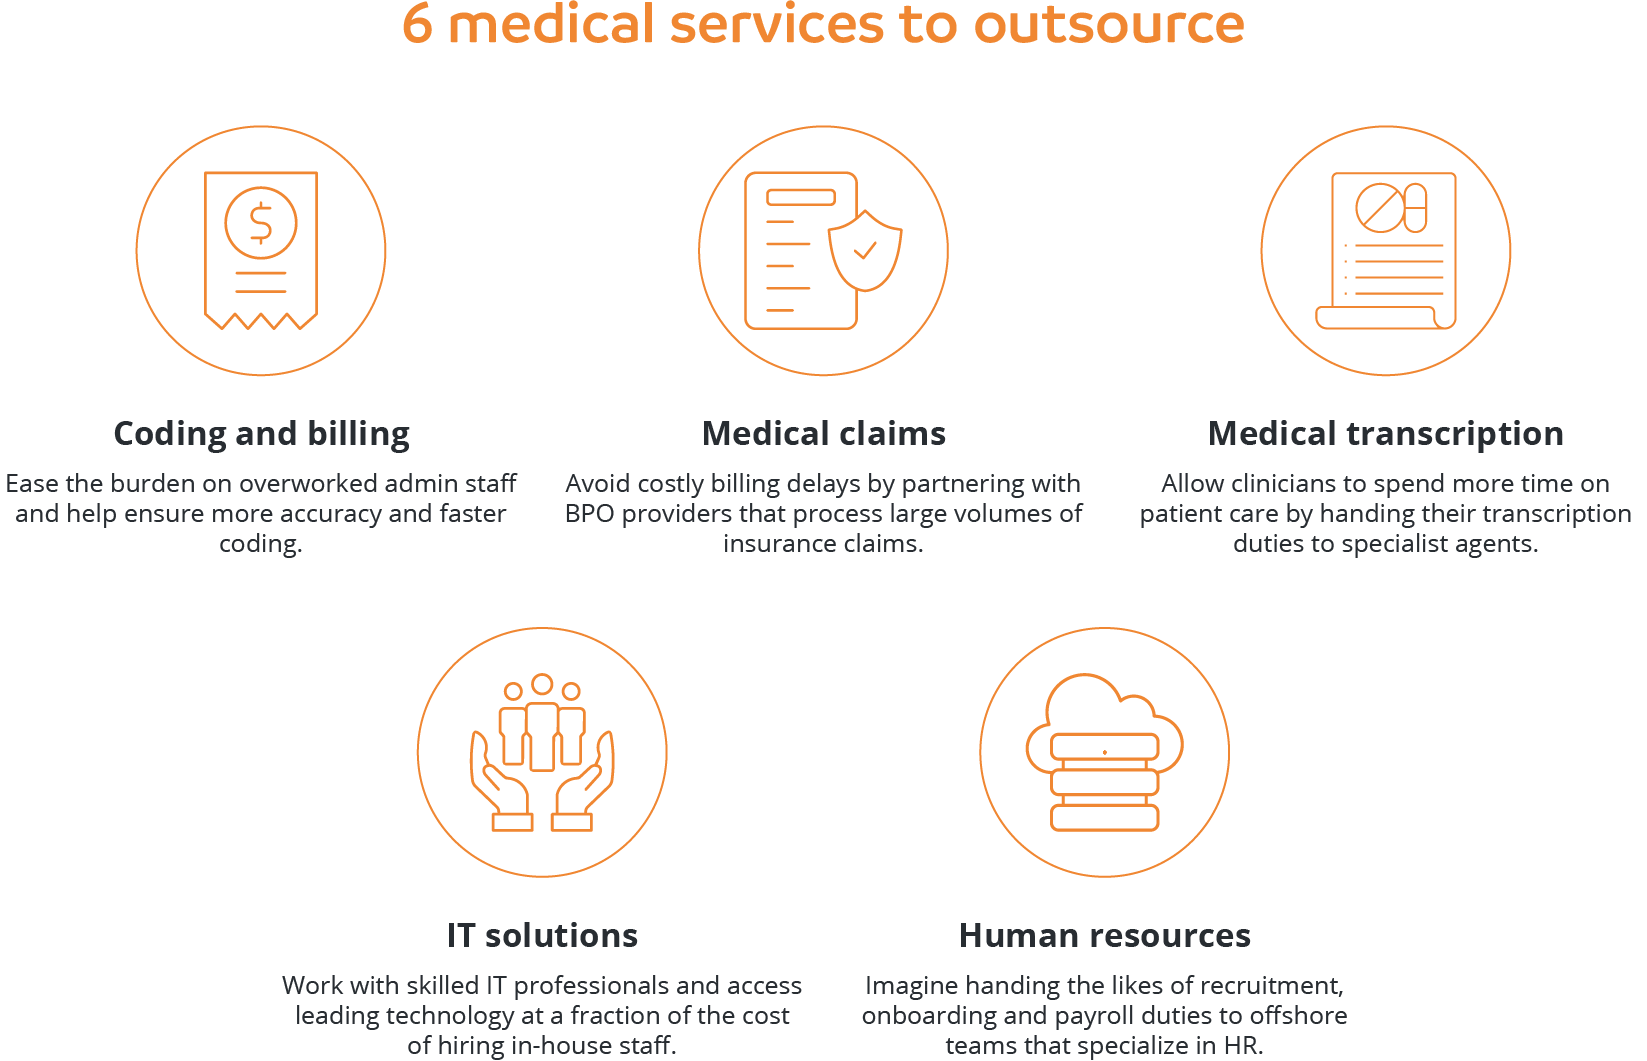 6 medical services to outsource